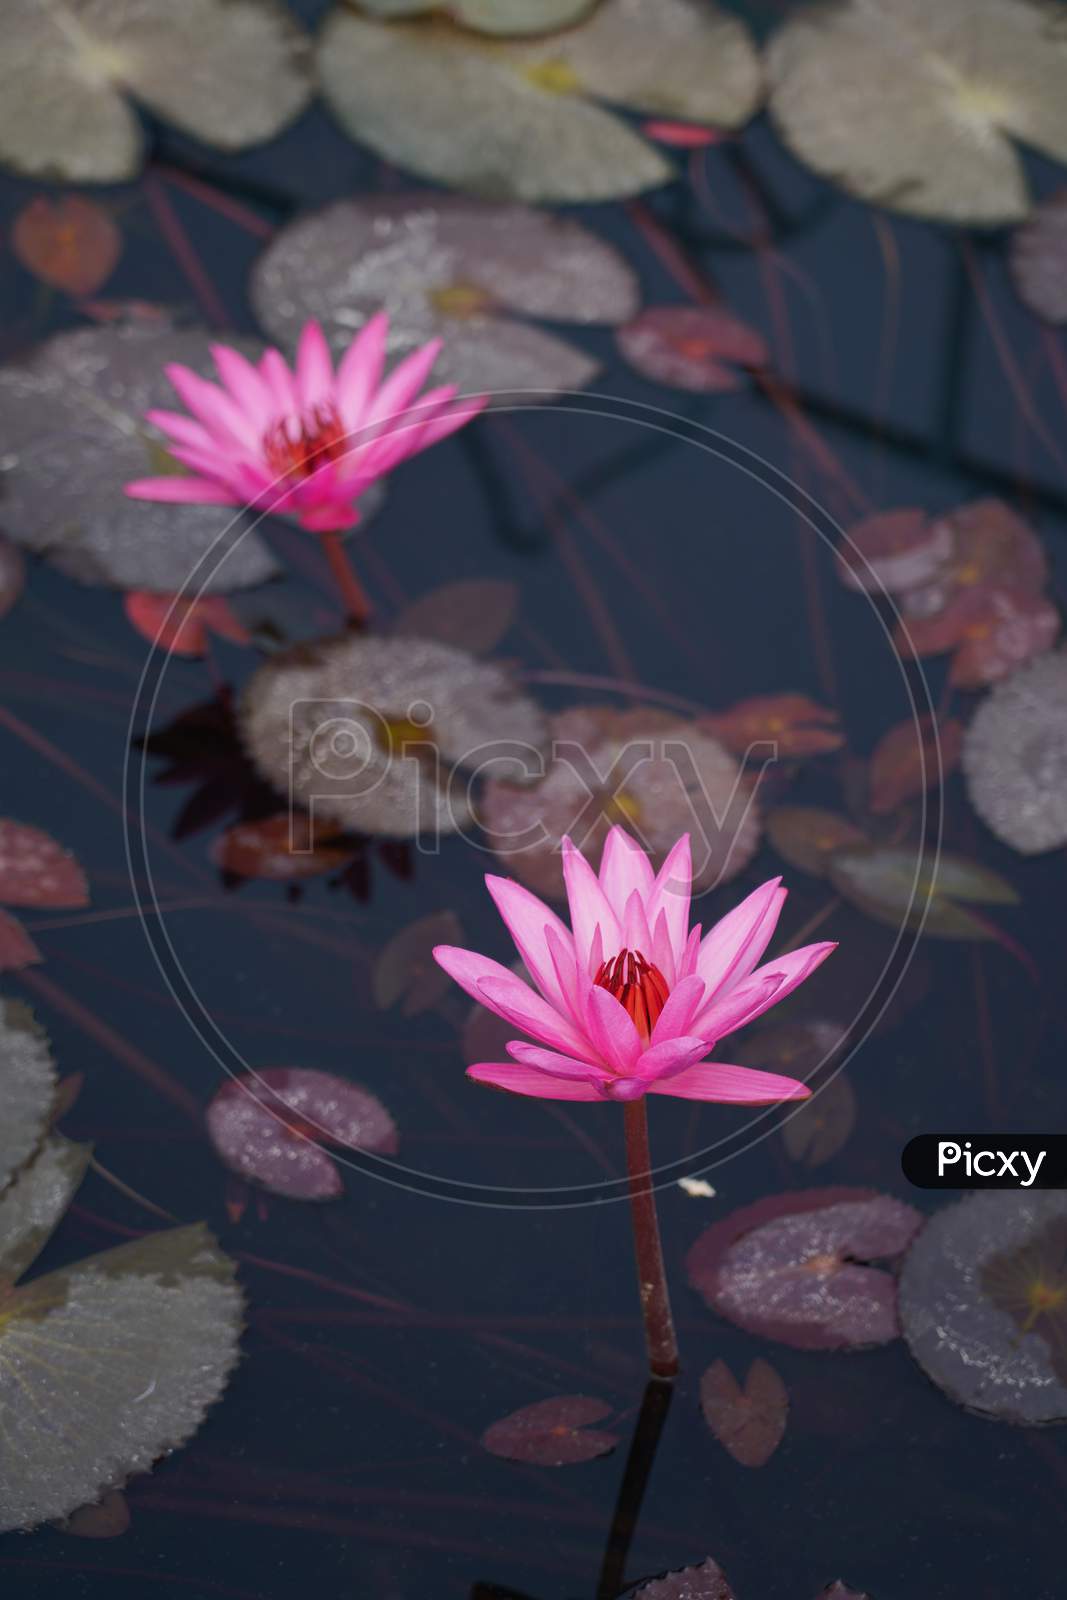 Two Pink Color Lotus Flowers In Blue Color Water Along With Other Leaves And Water Plants.